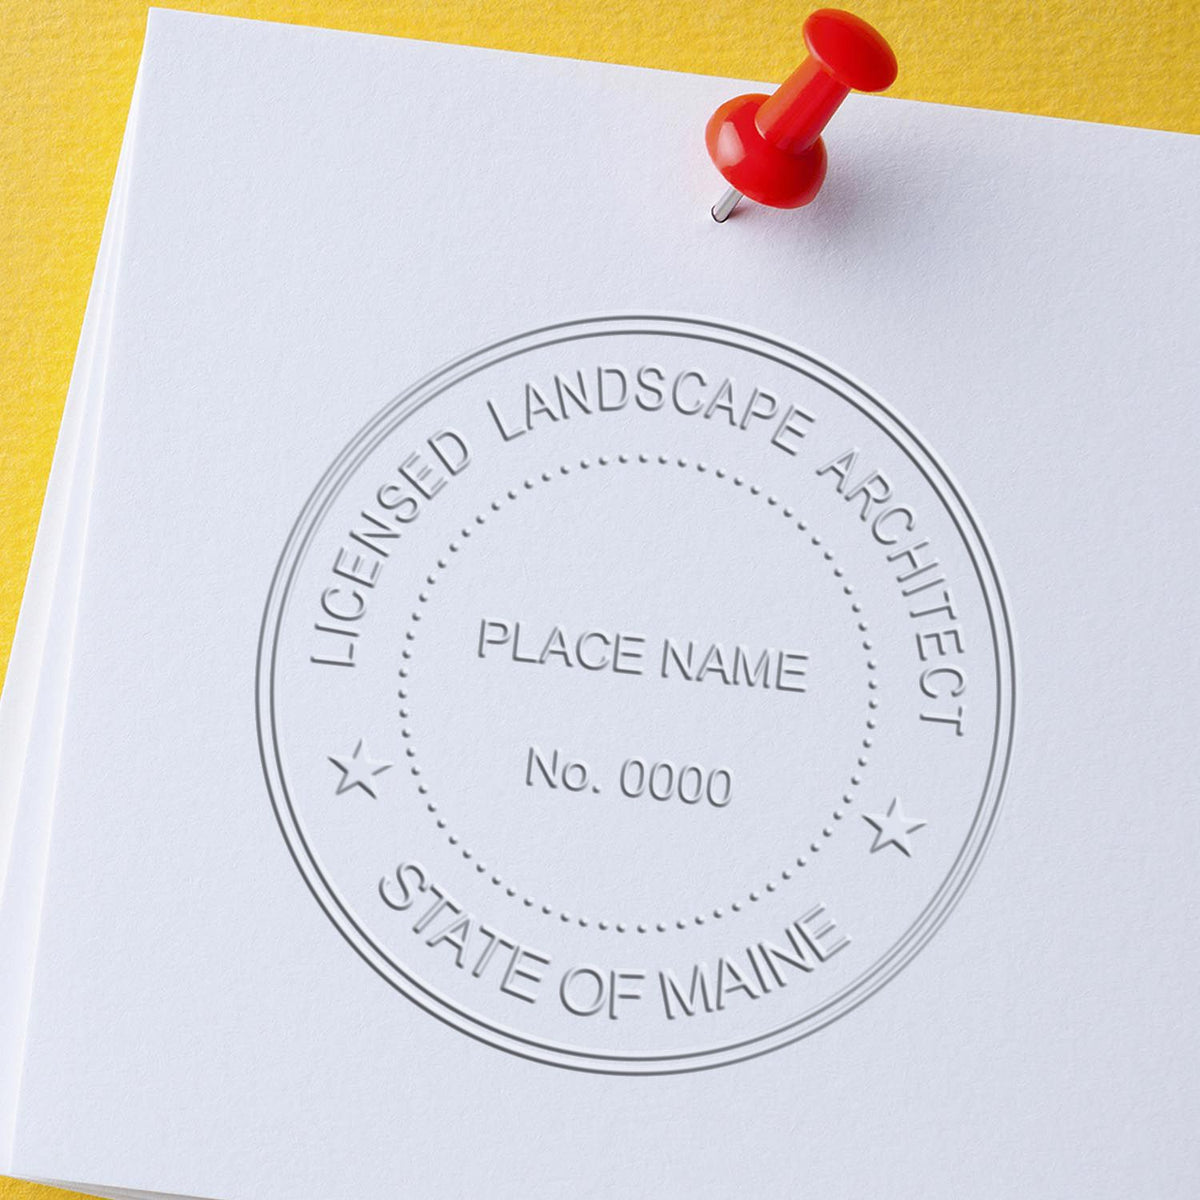 The Soft Pocket Maine Landscape Architect Embosser stamp impression comes to life with a crisp, detailed photo on paper - showcasing true professional quality.